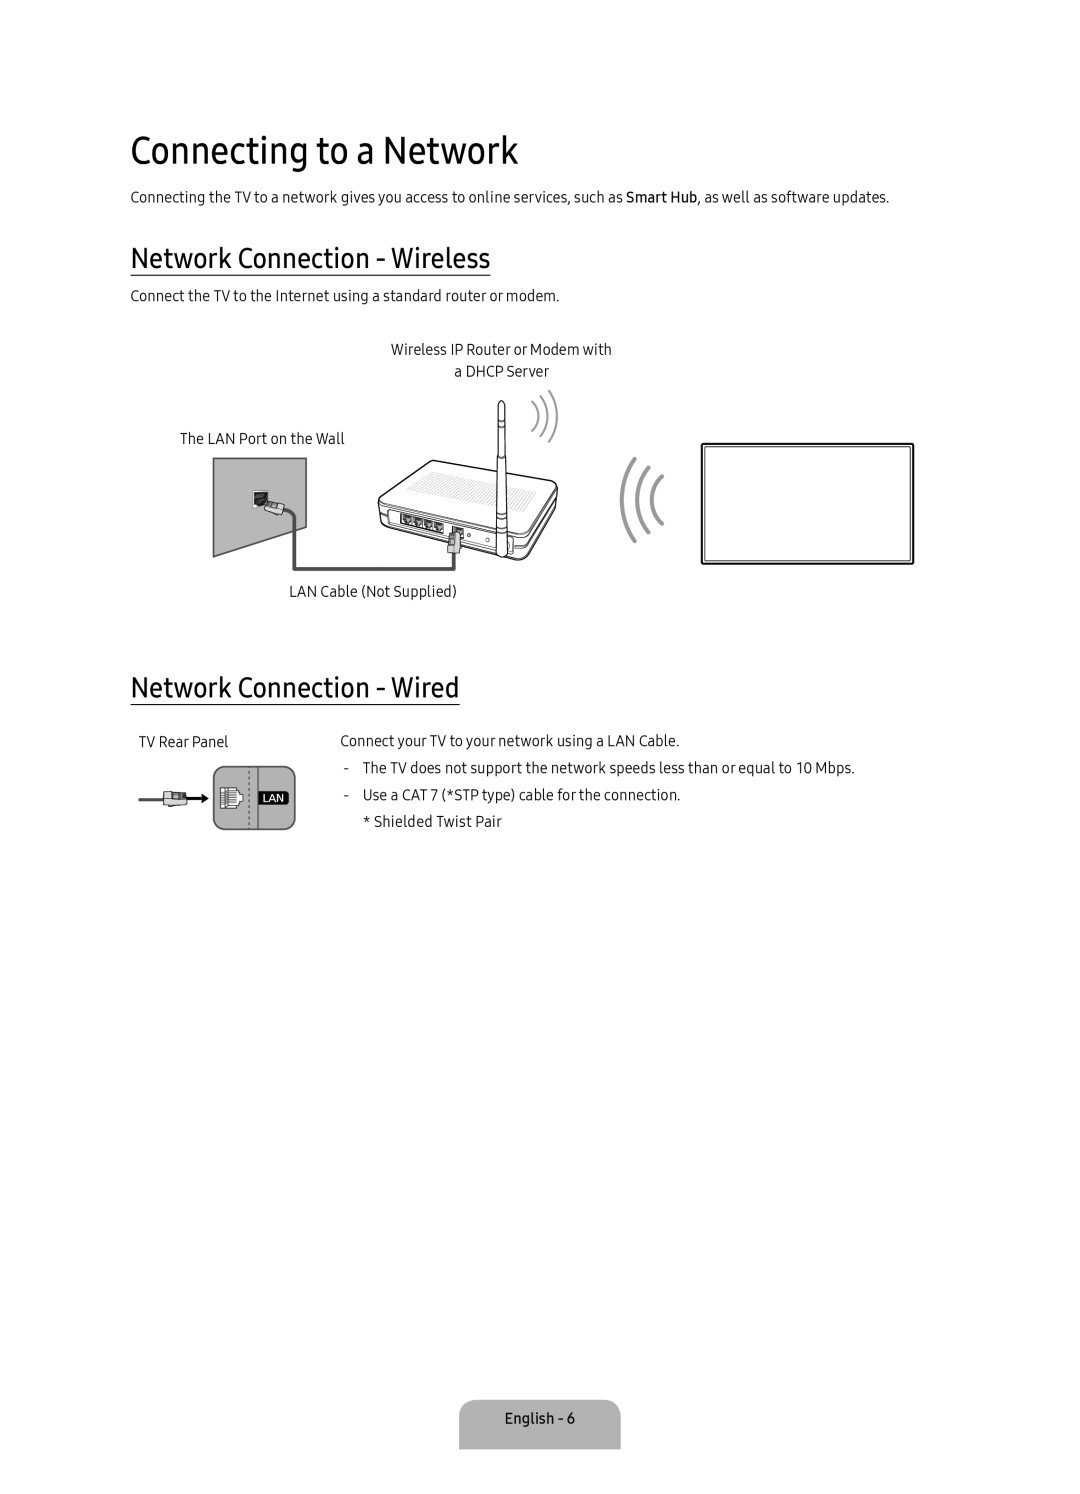 Samsung UA55KS9000KXXV manual Connecting to a Network, Network Connection - Wireless, Network Connection - Wired, English 